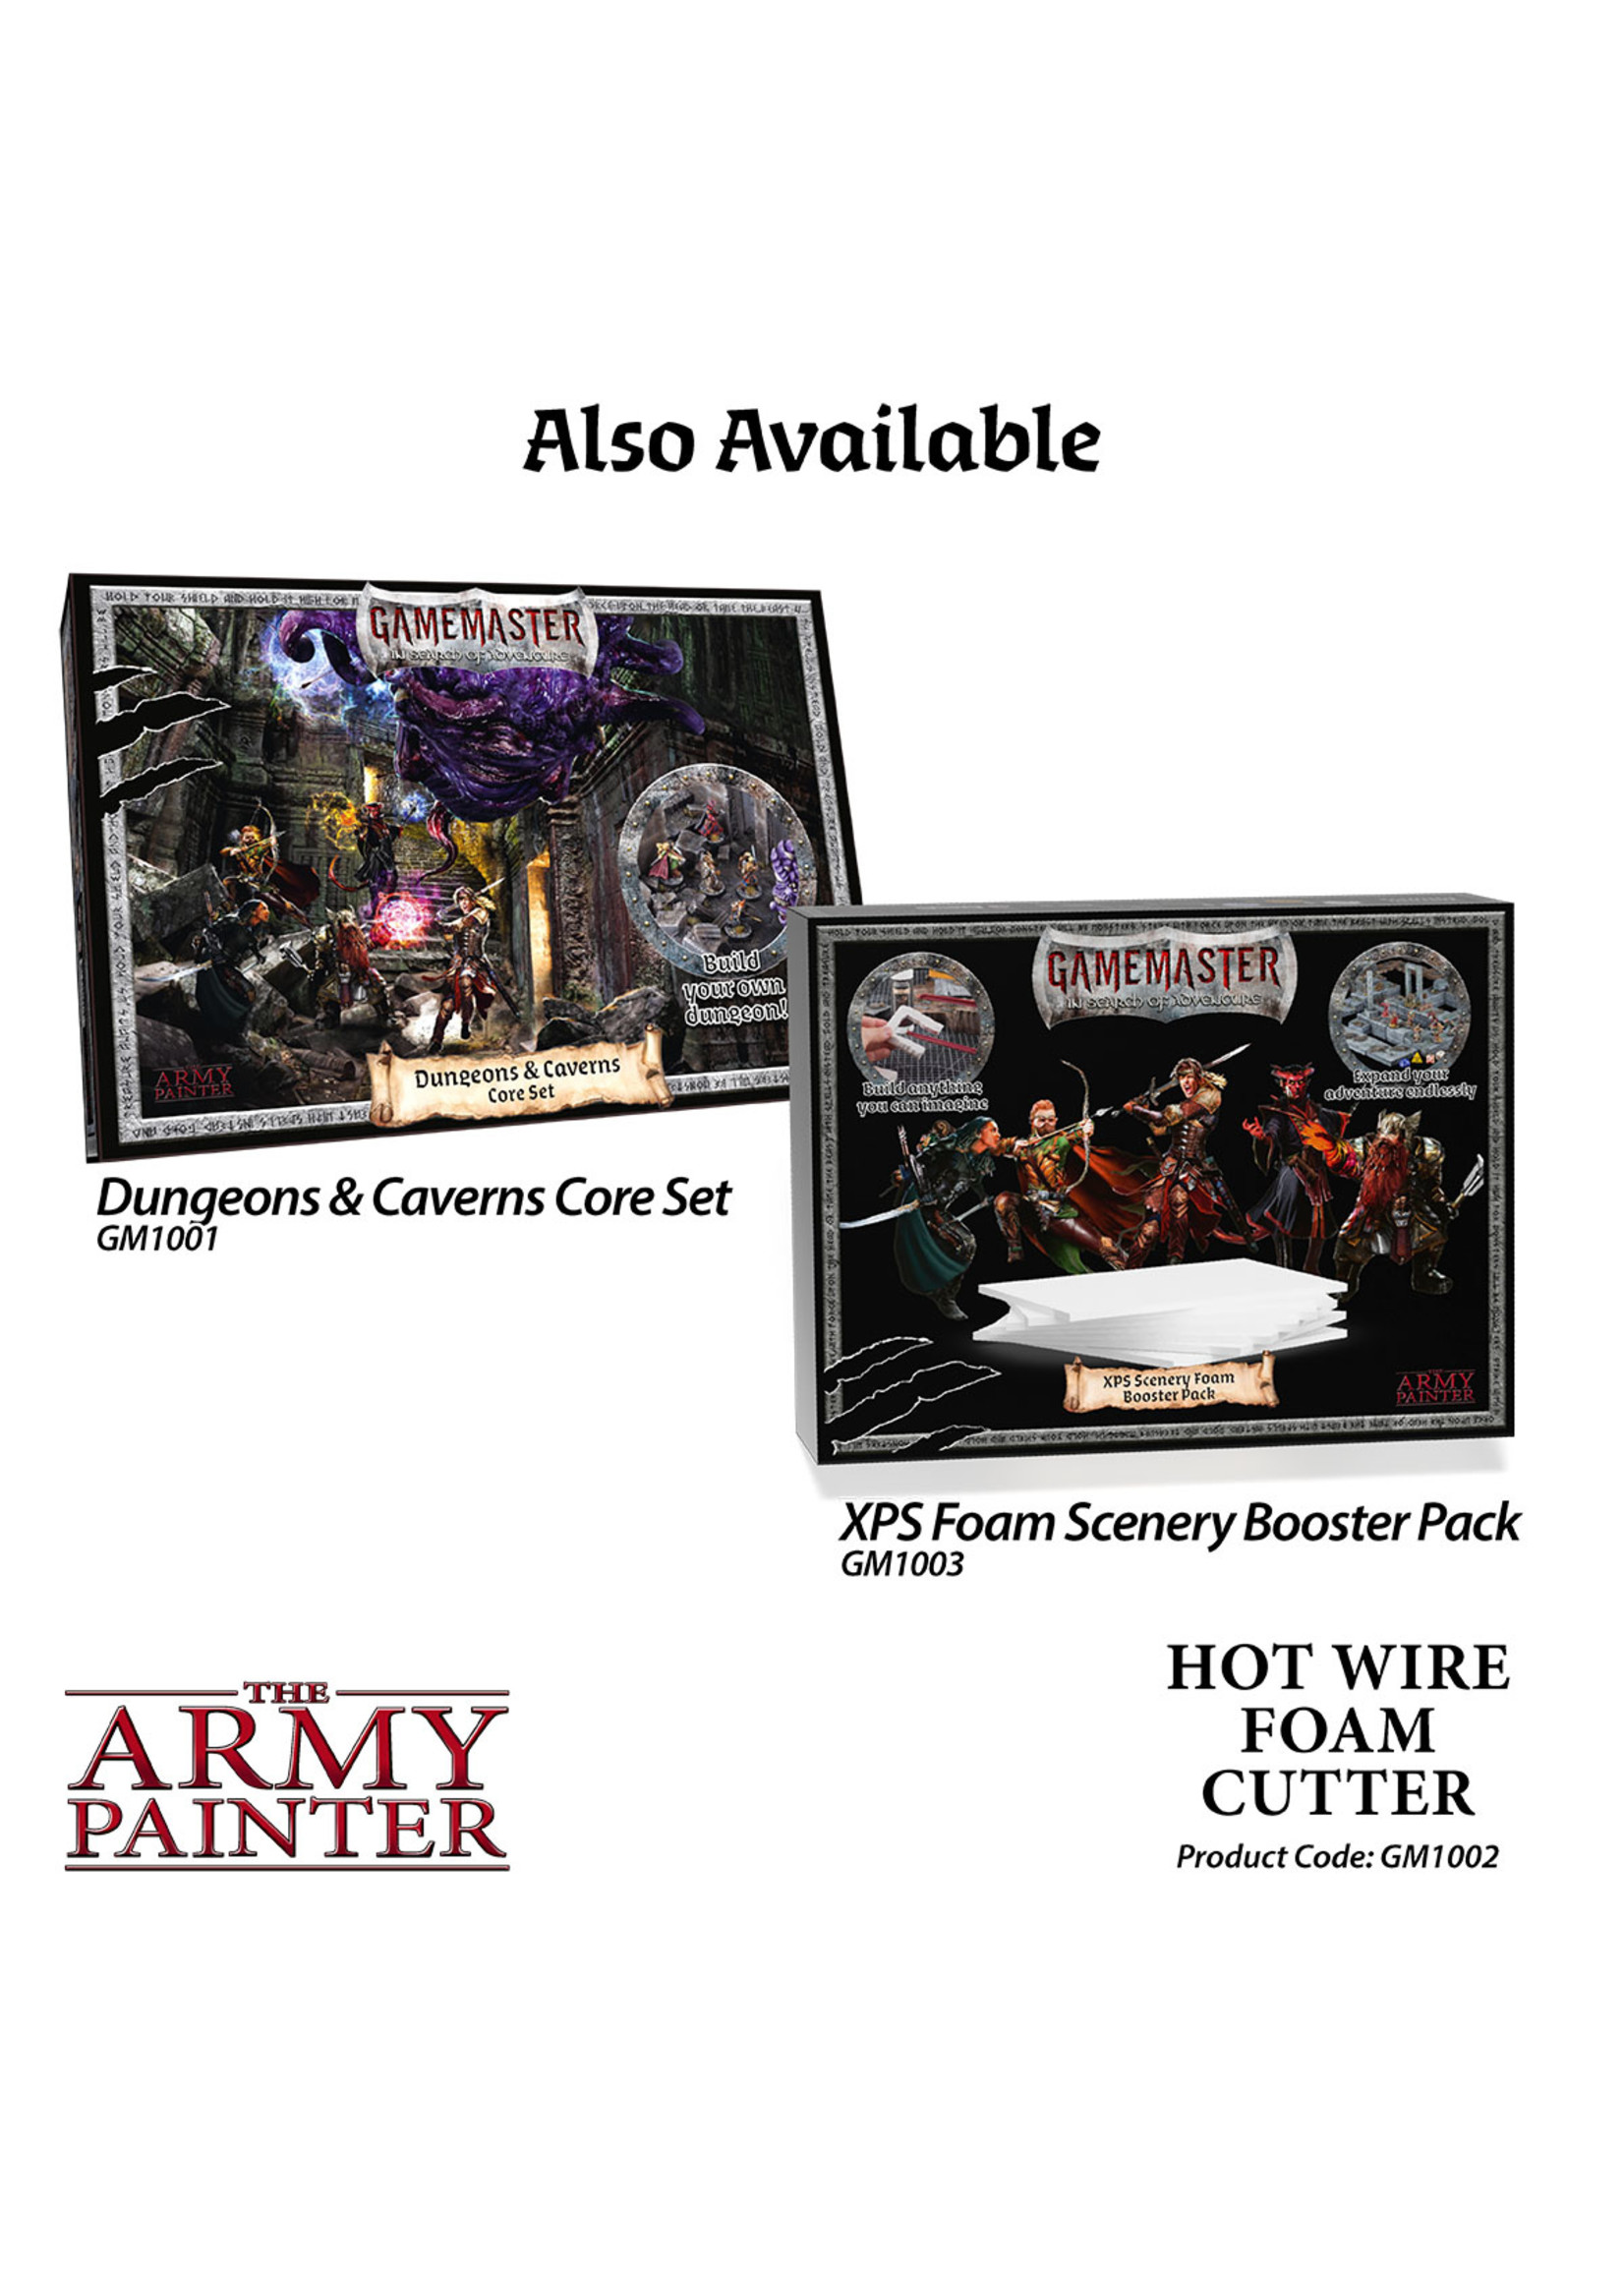 The Army Painter Hot Wire Foam Cutter: Gamemaster - The Army Painter